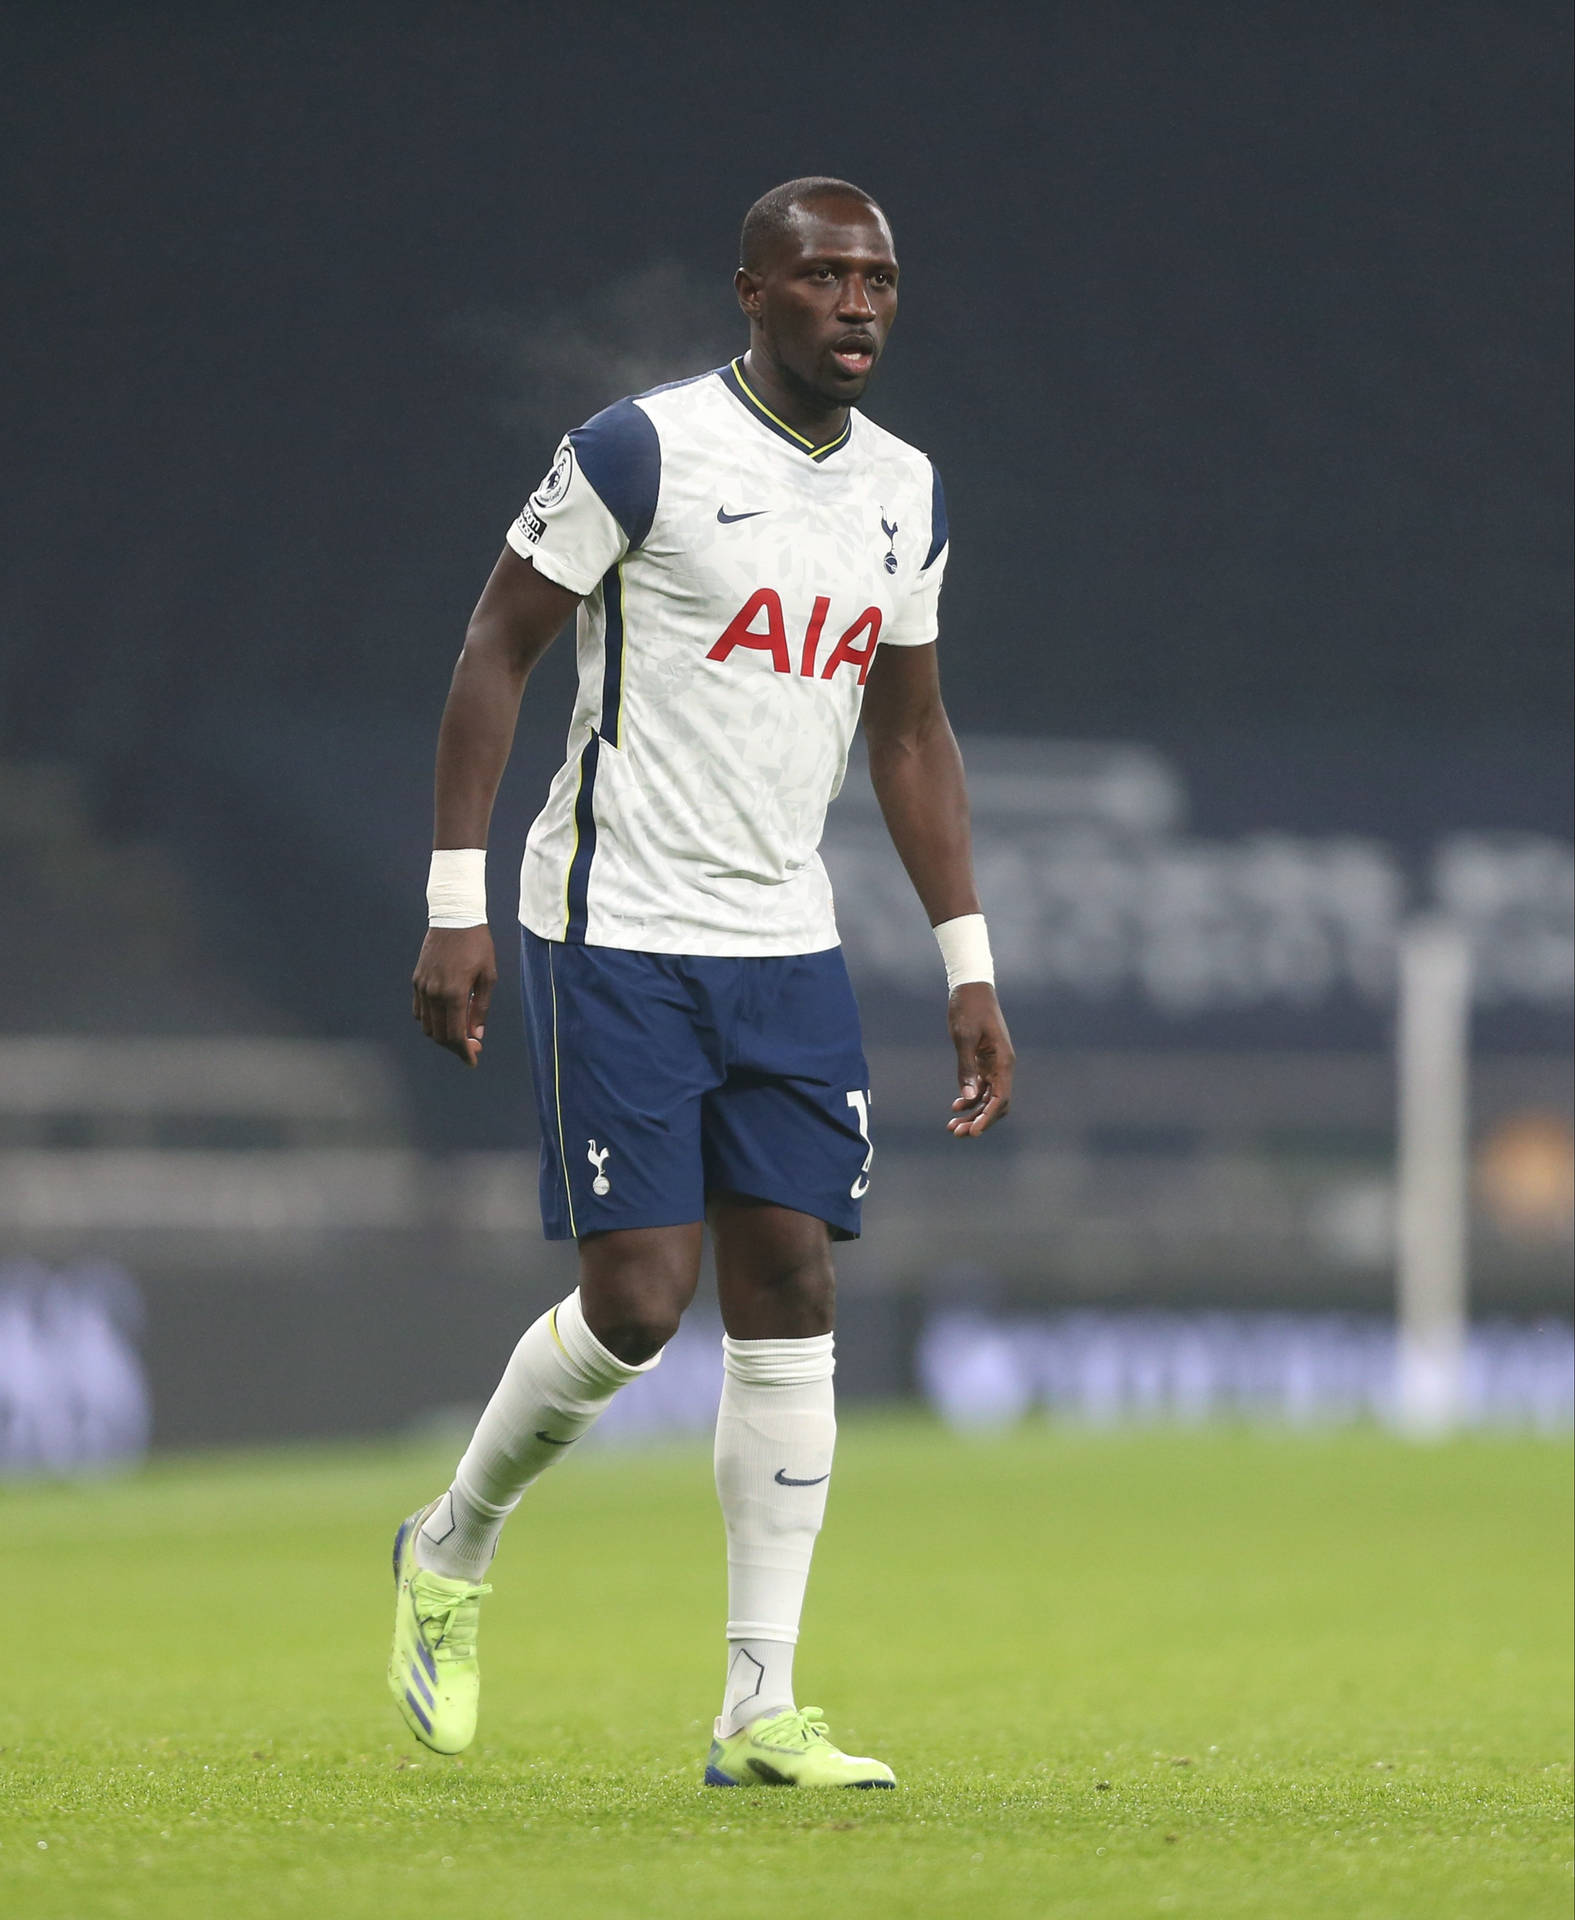 Moussa Sissoko In Action During A Football Match Wallpaper